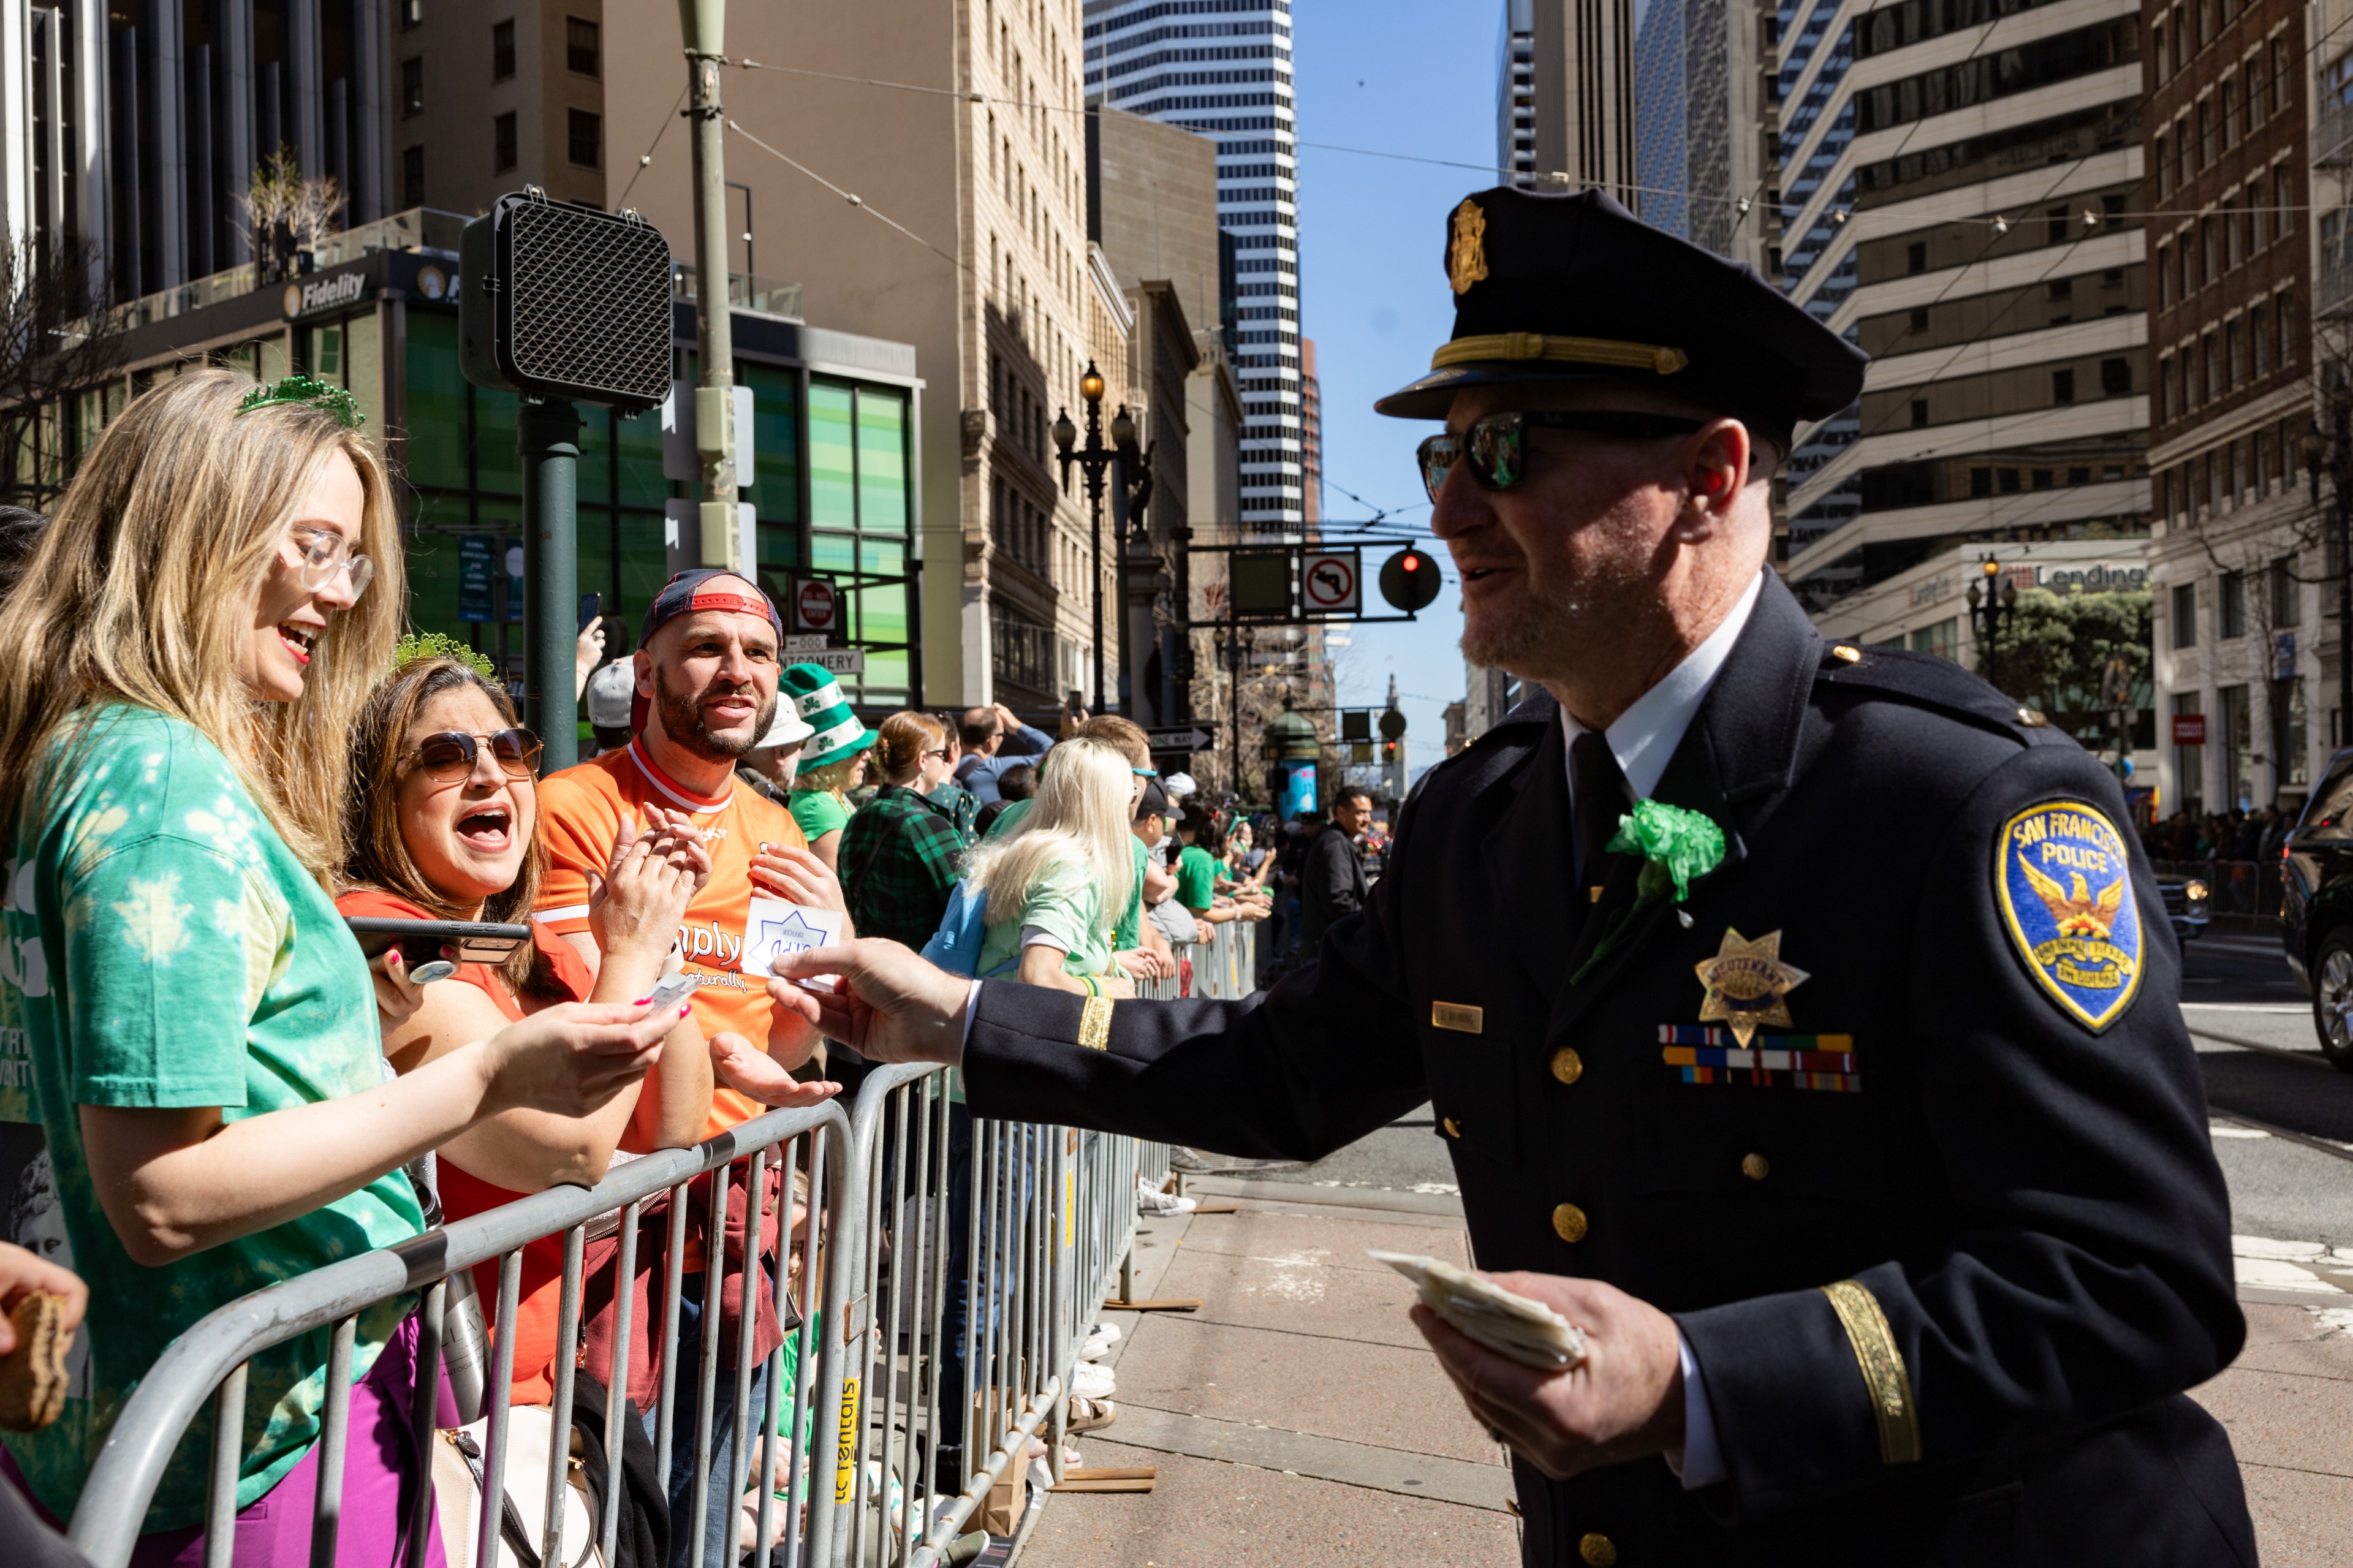 Police and spectators at San Francisco's St. Patrick's Day parade